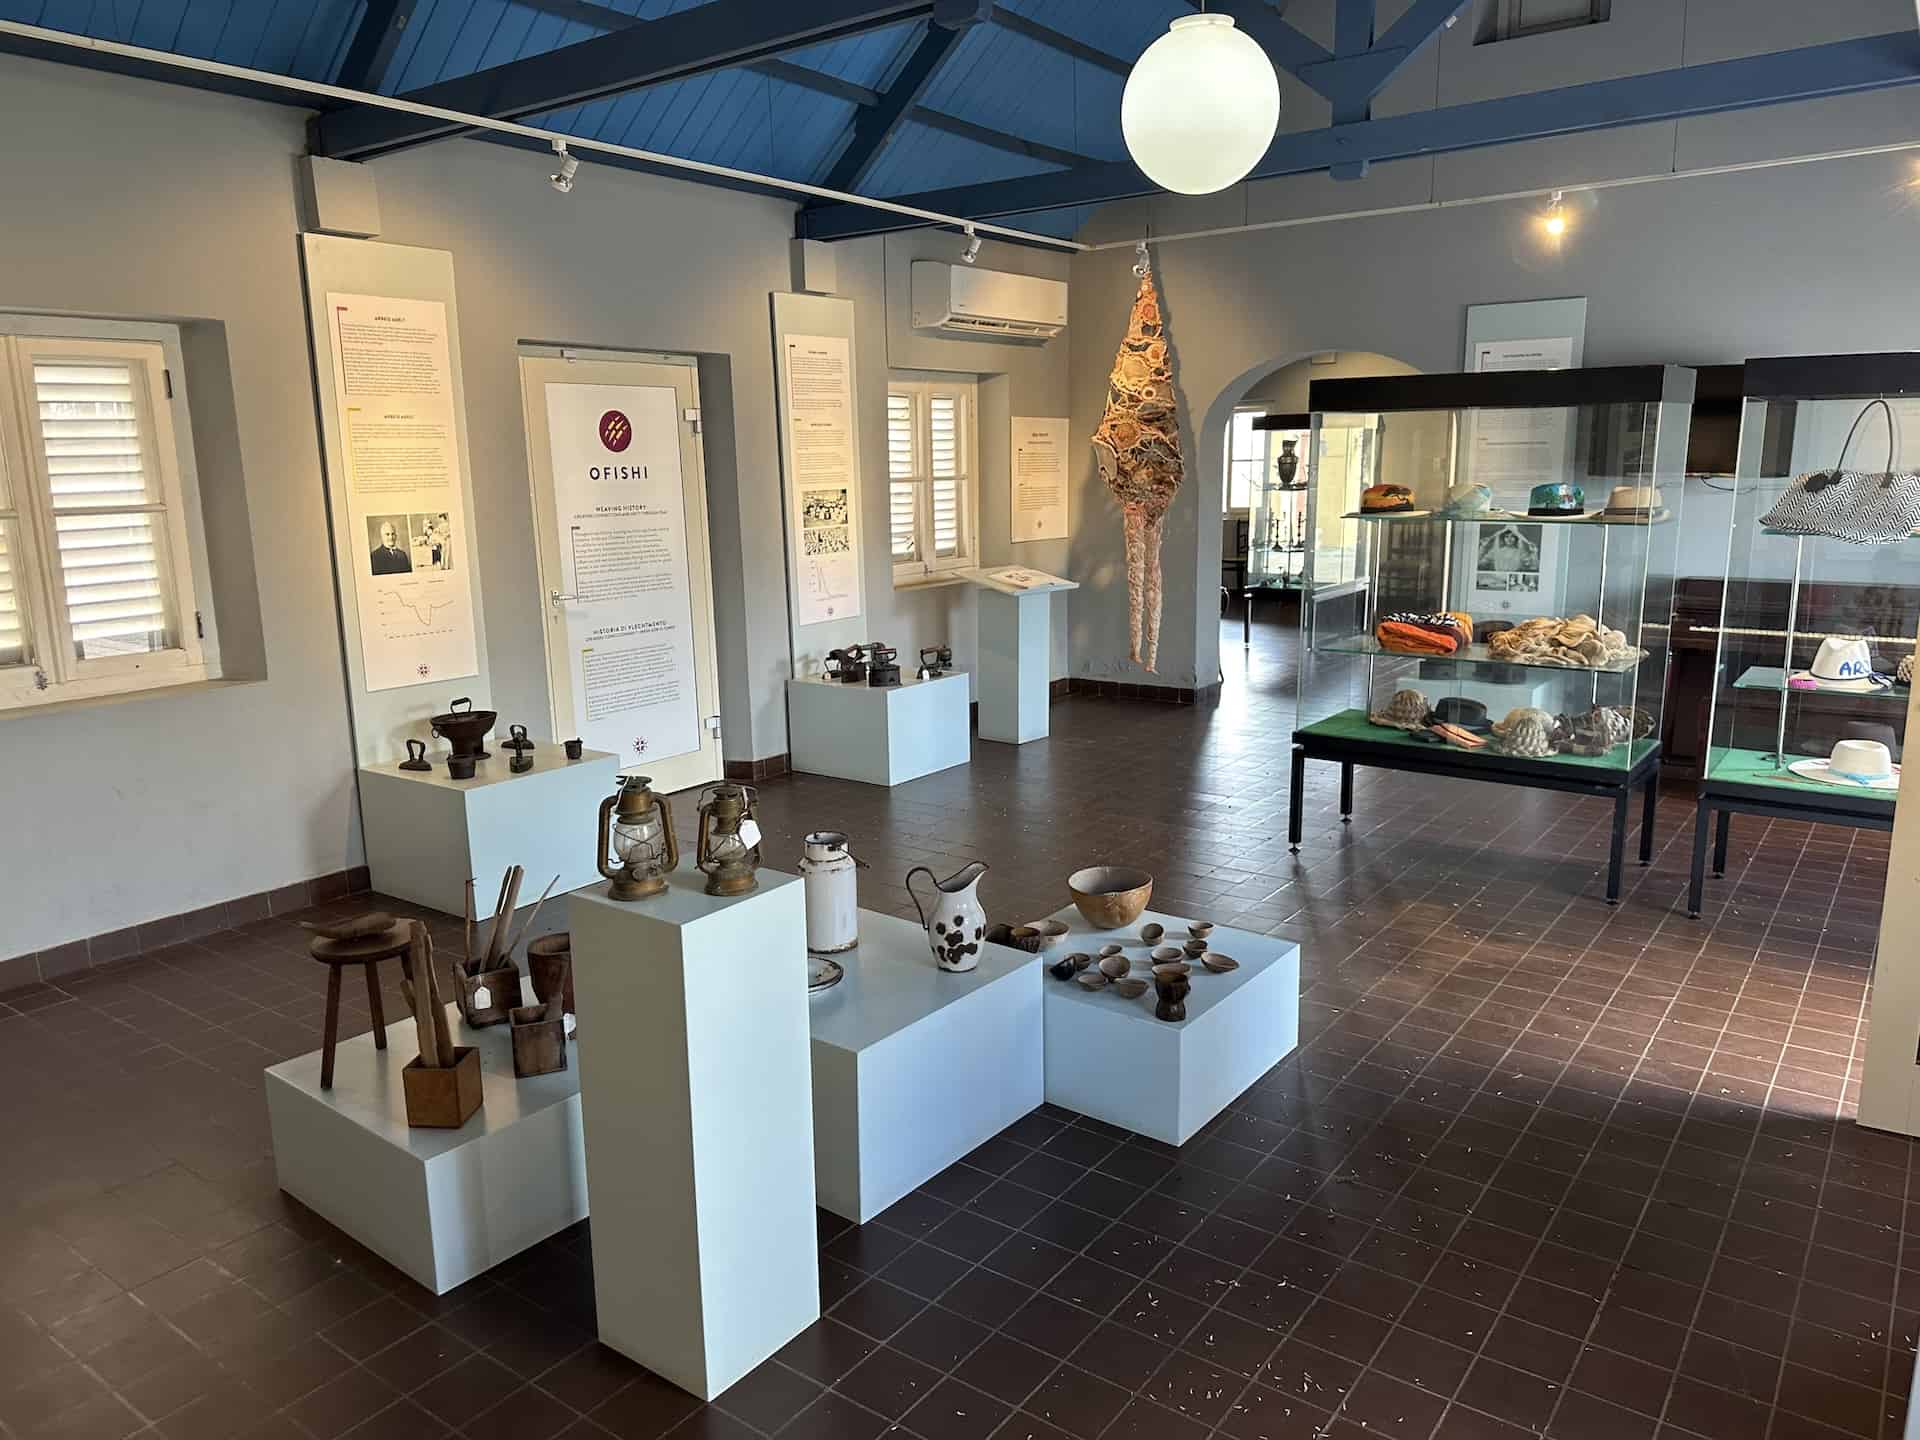 First gallery at the Historical Museum of Aruba in Oranjestad